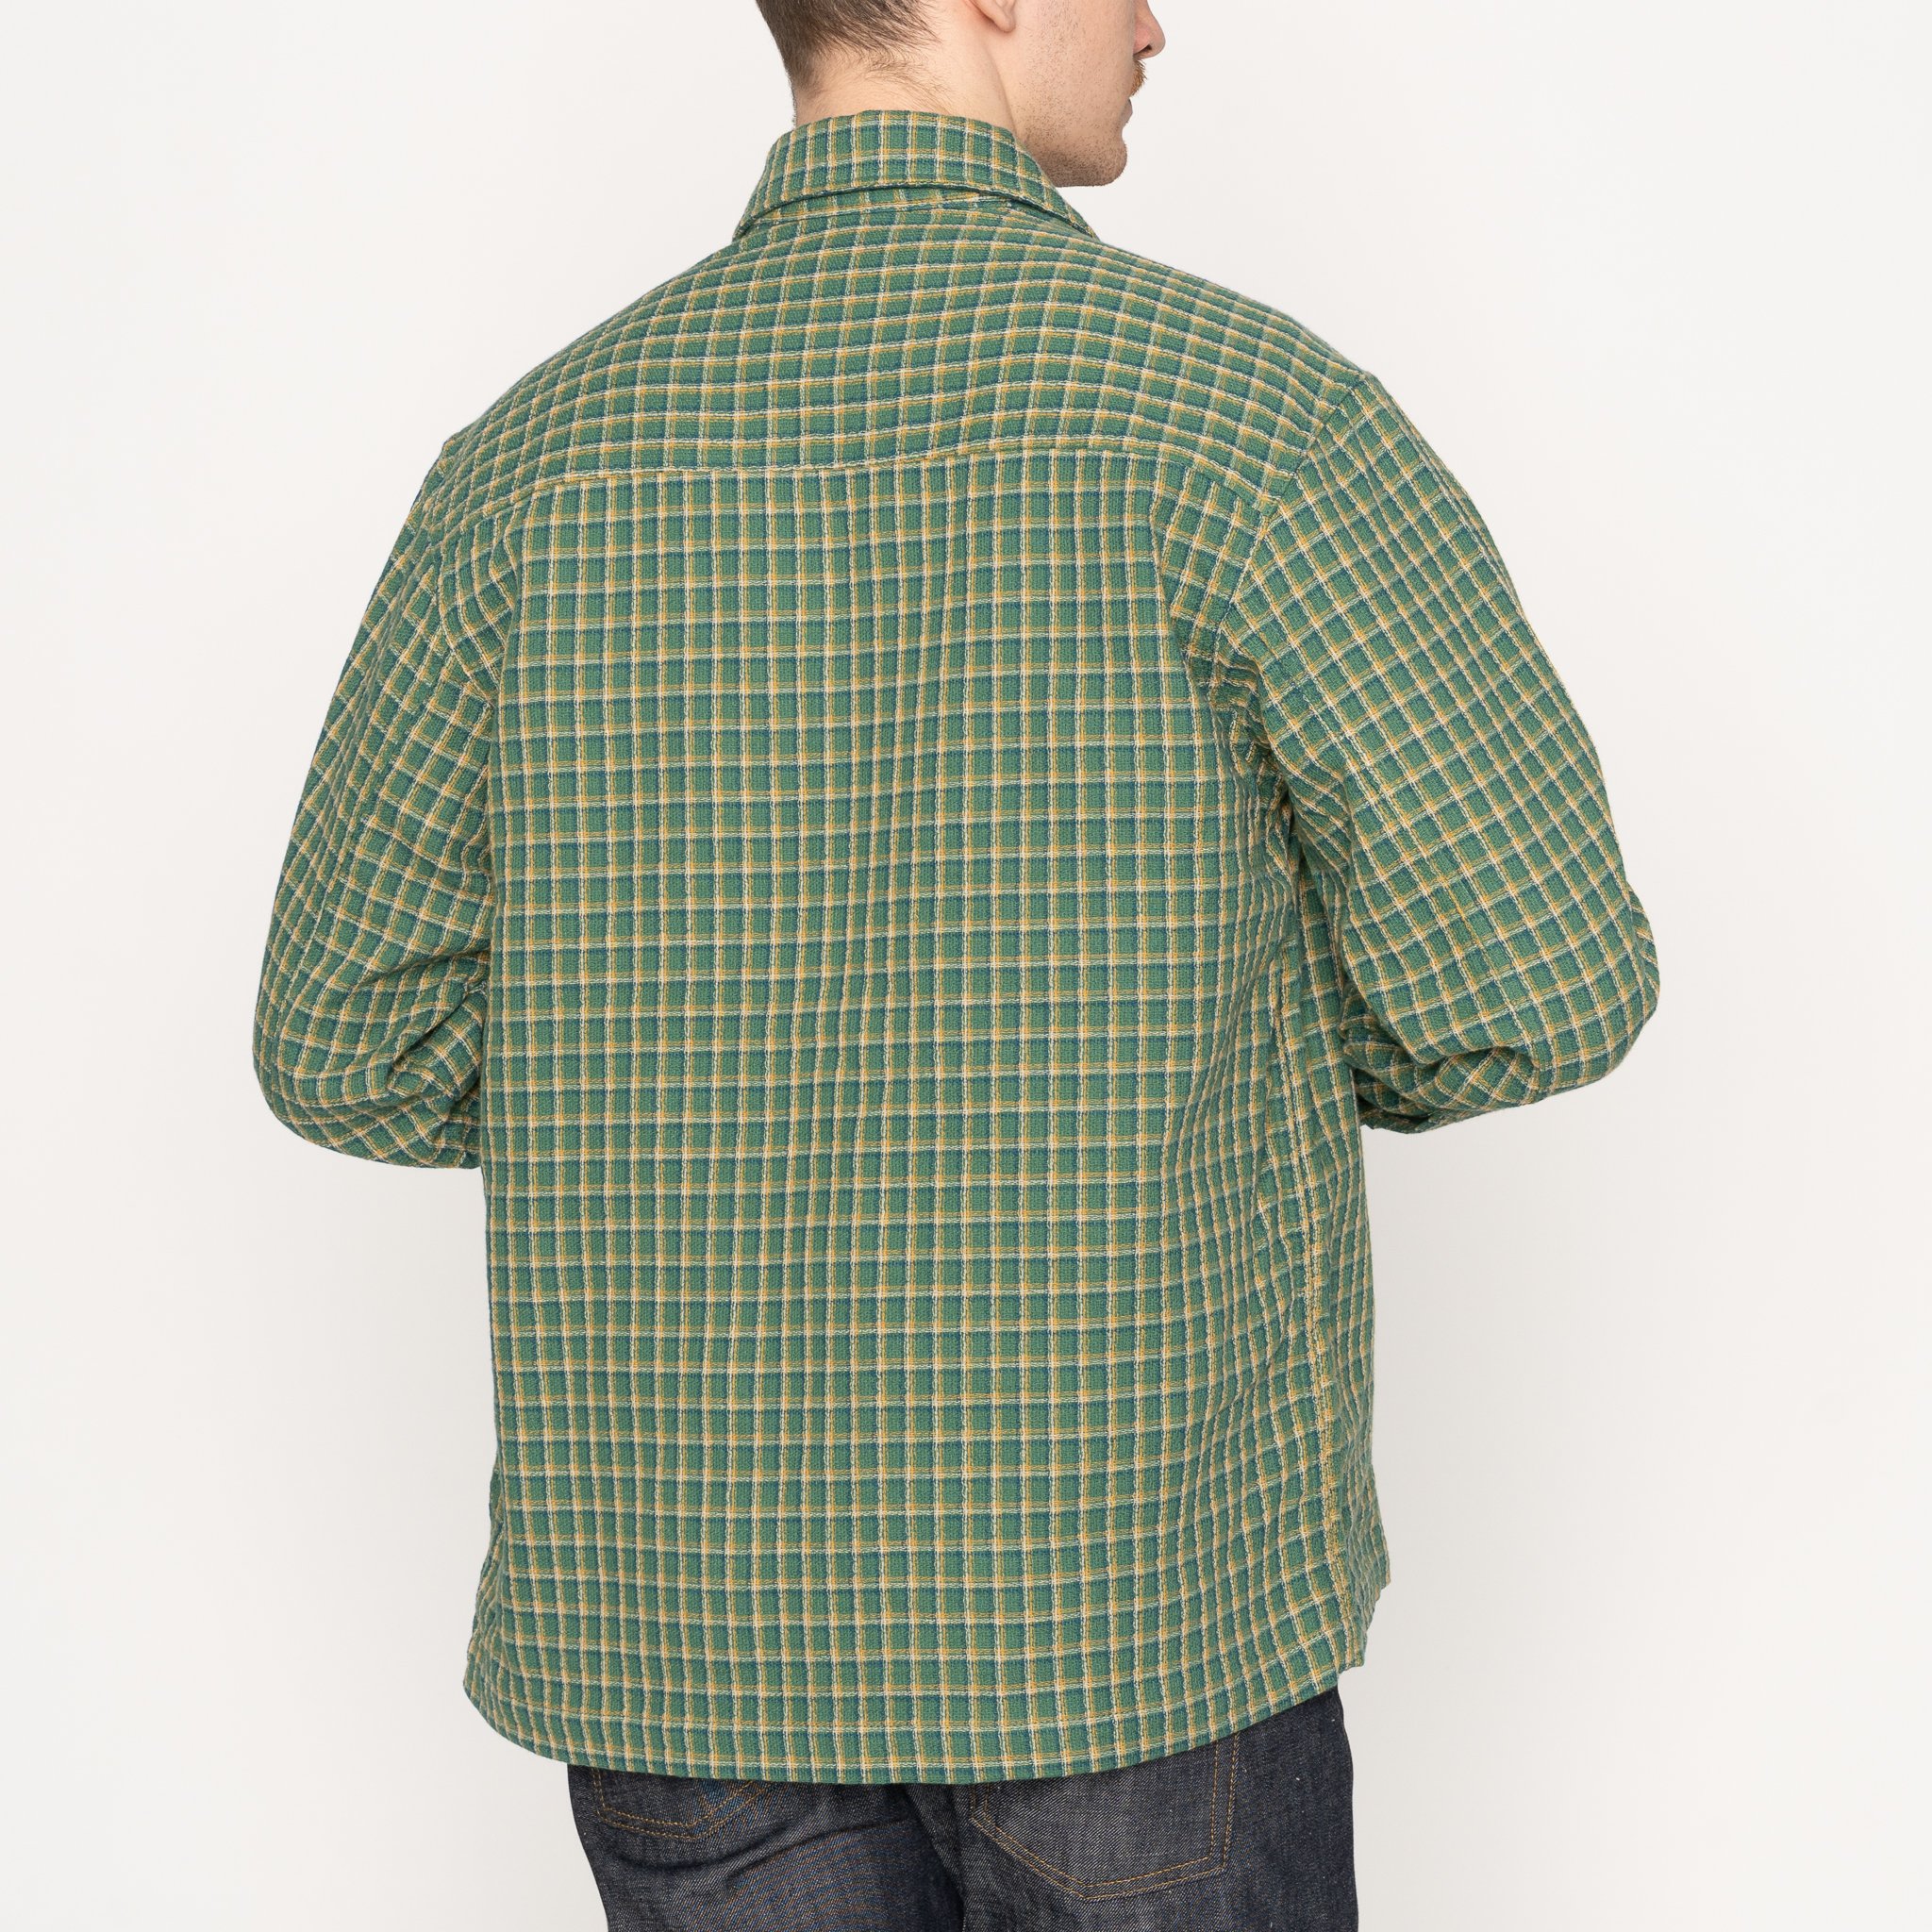  Over Shirt - Yarn Dyed Double Cloth - Green 